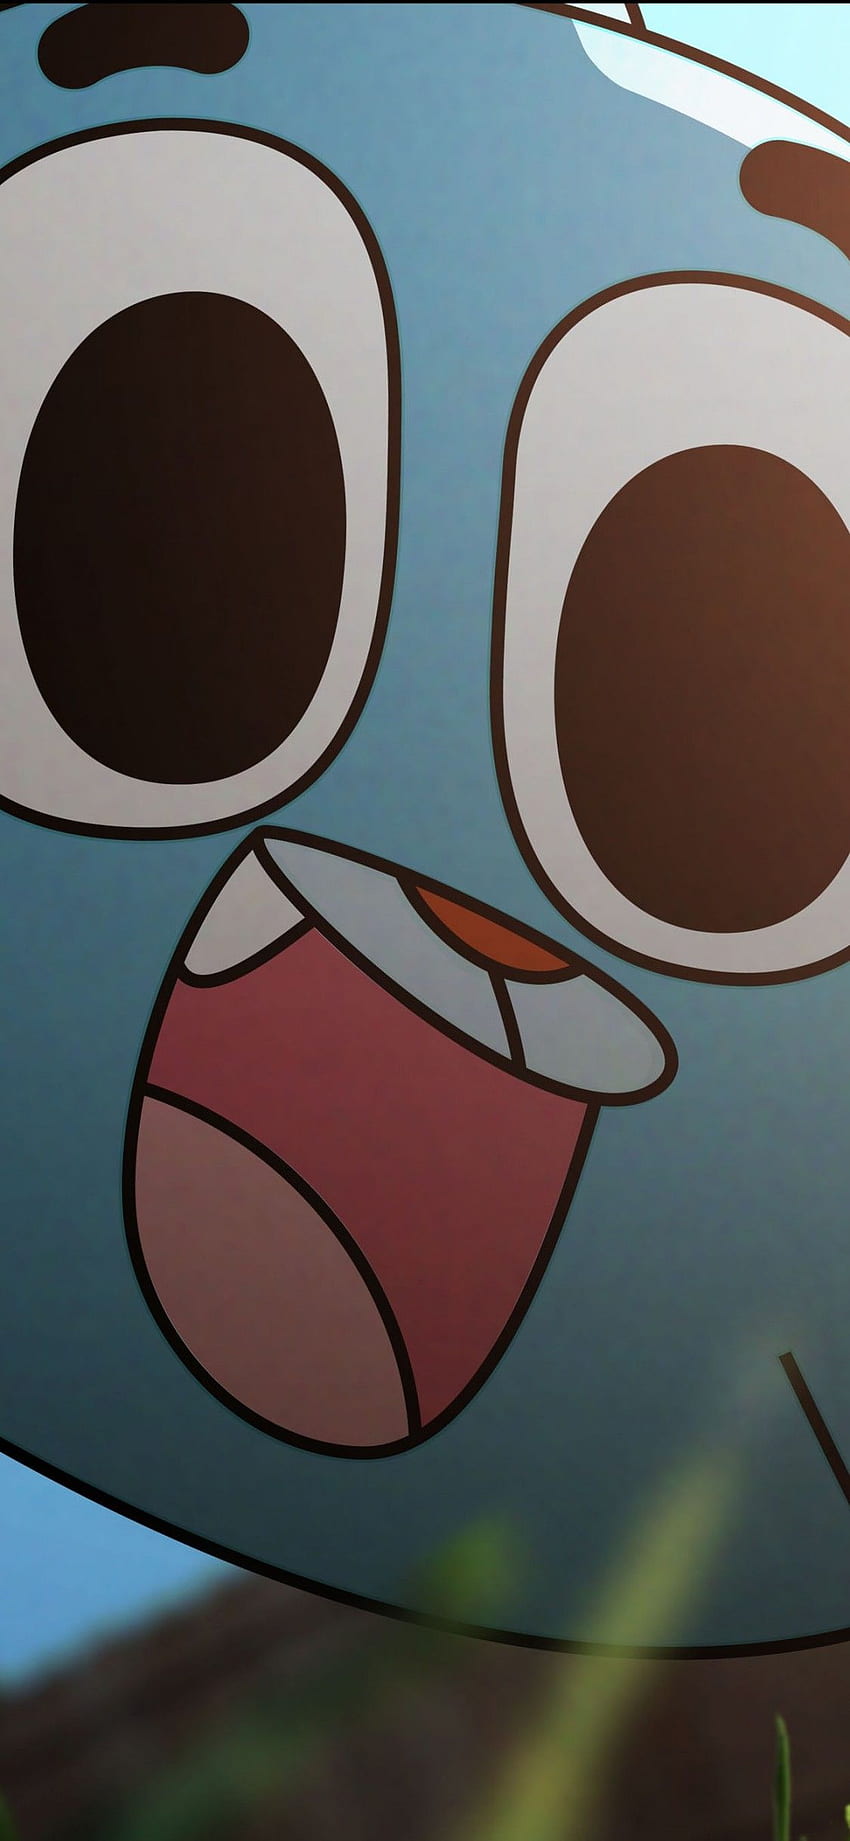 A wallpaper I made of Gumball  rgumball